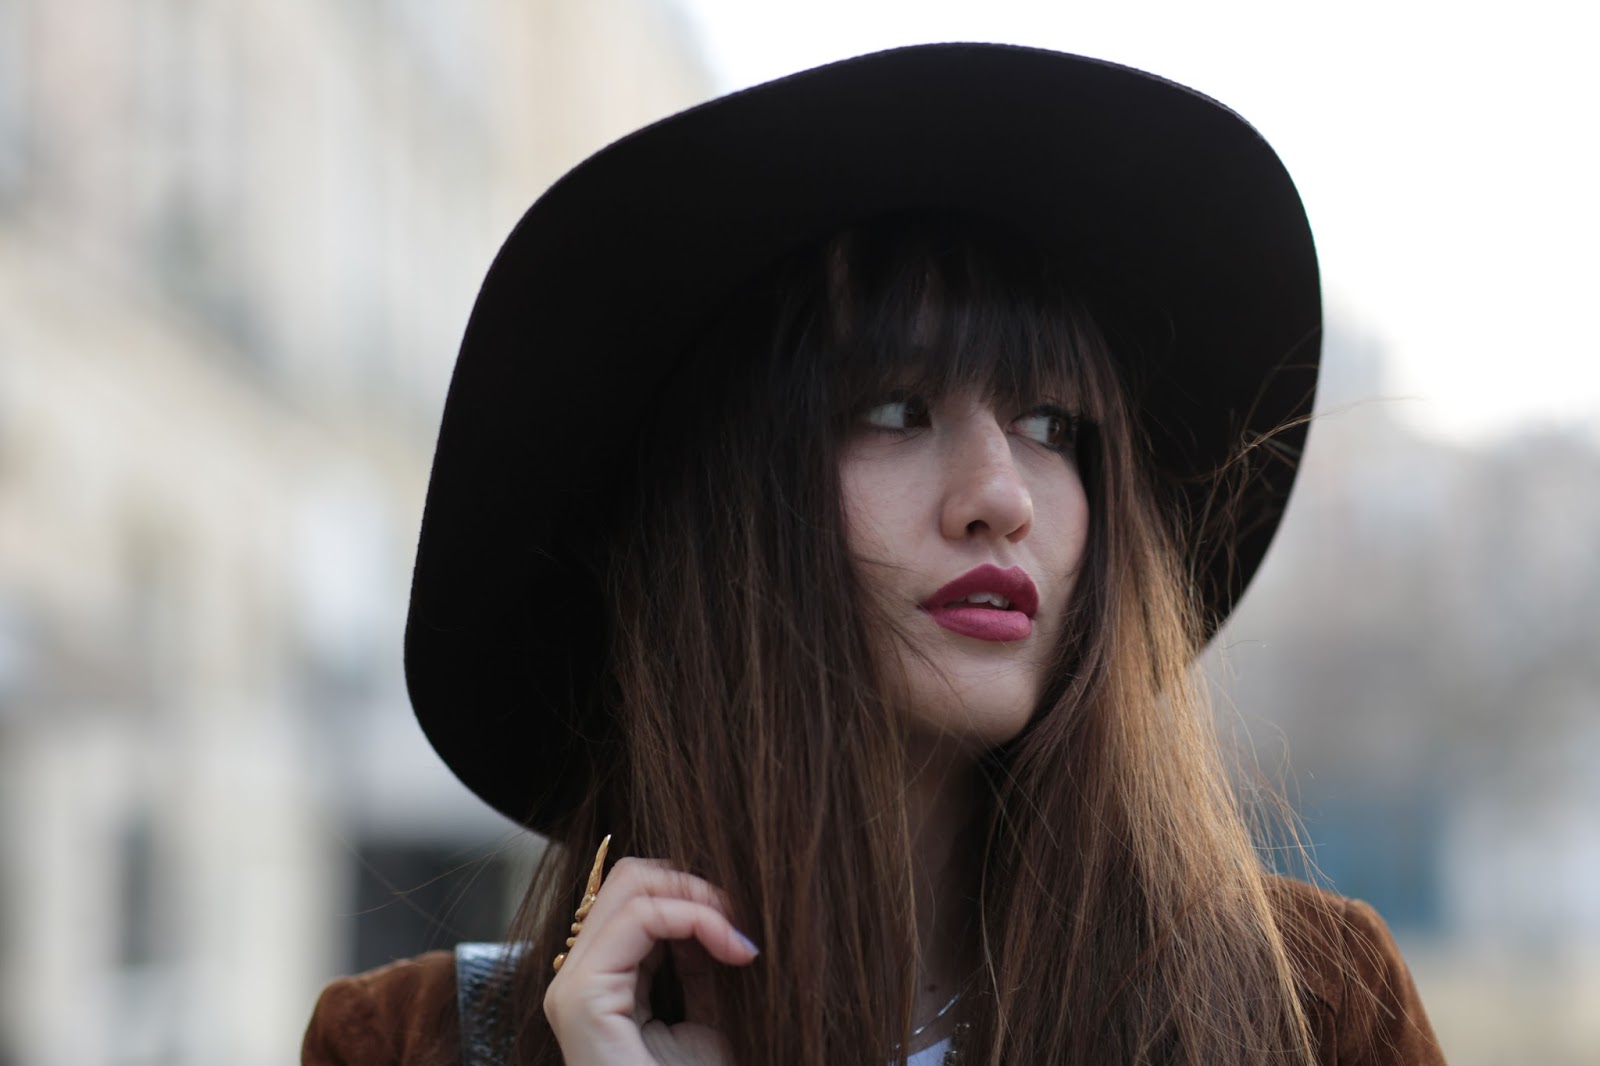 meet me in paree, blogger, fashion, look, style, chic style, boho look